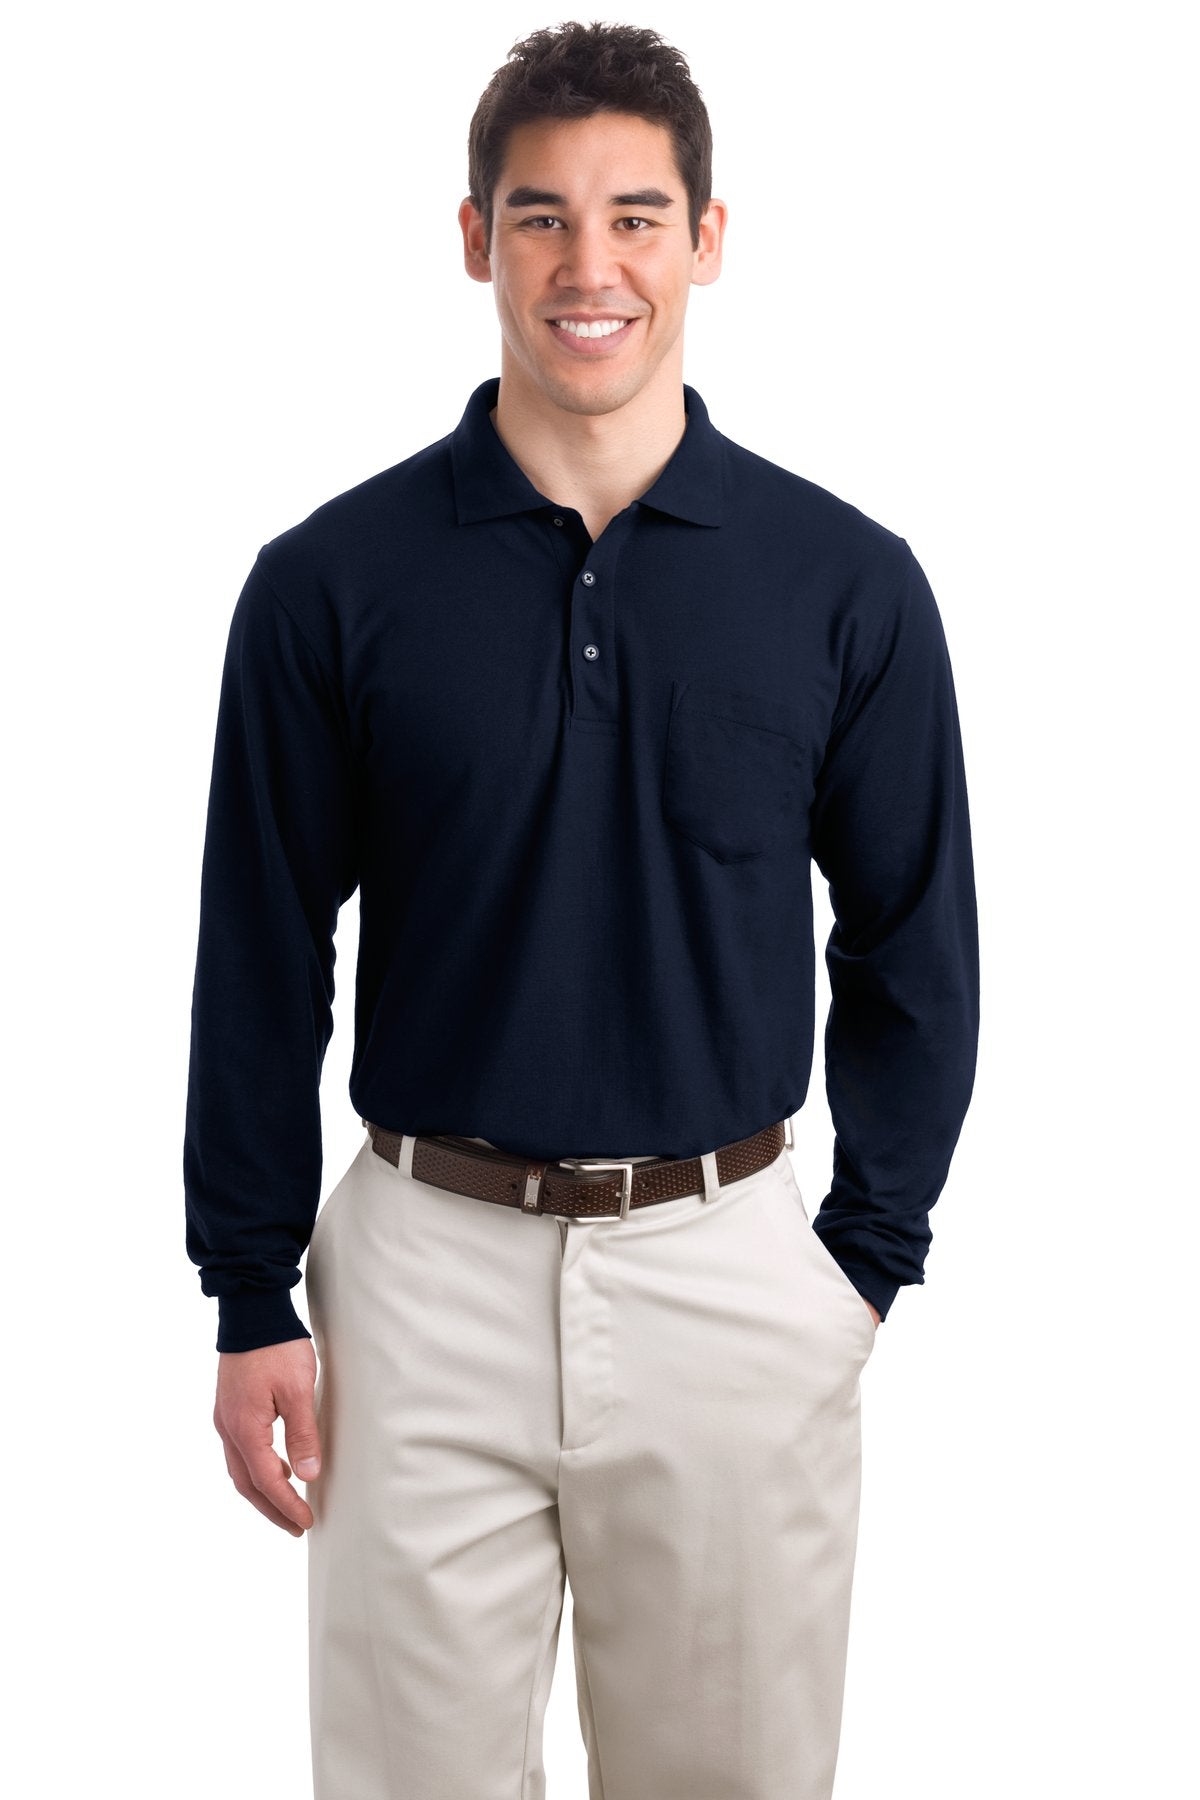 Port Authority Long Sleeve Silk Touch™ Polo with Pocket. K500LSP